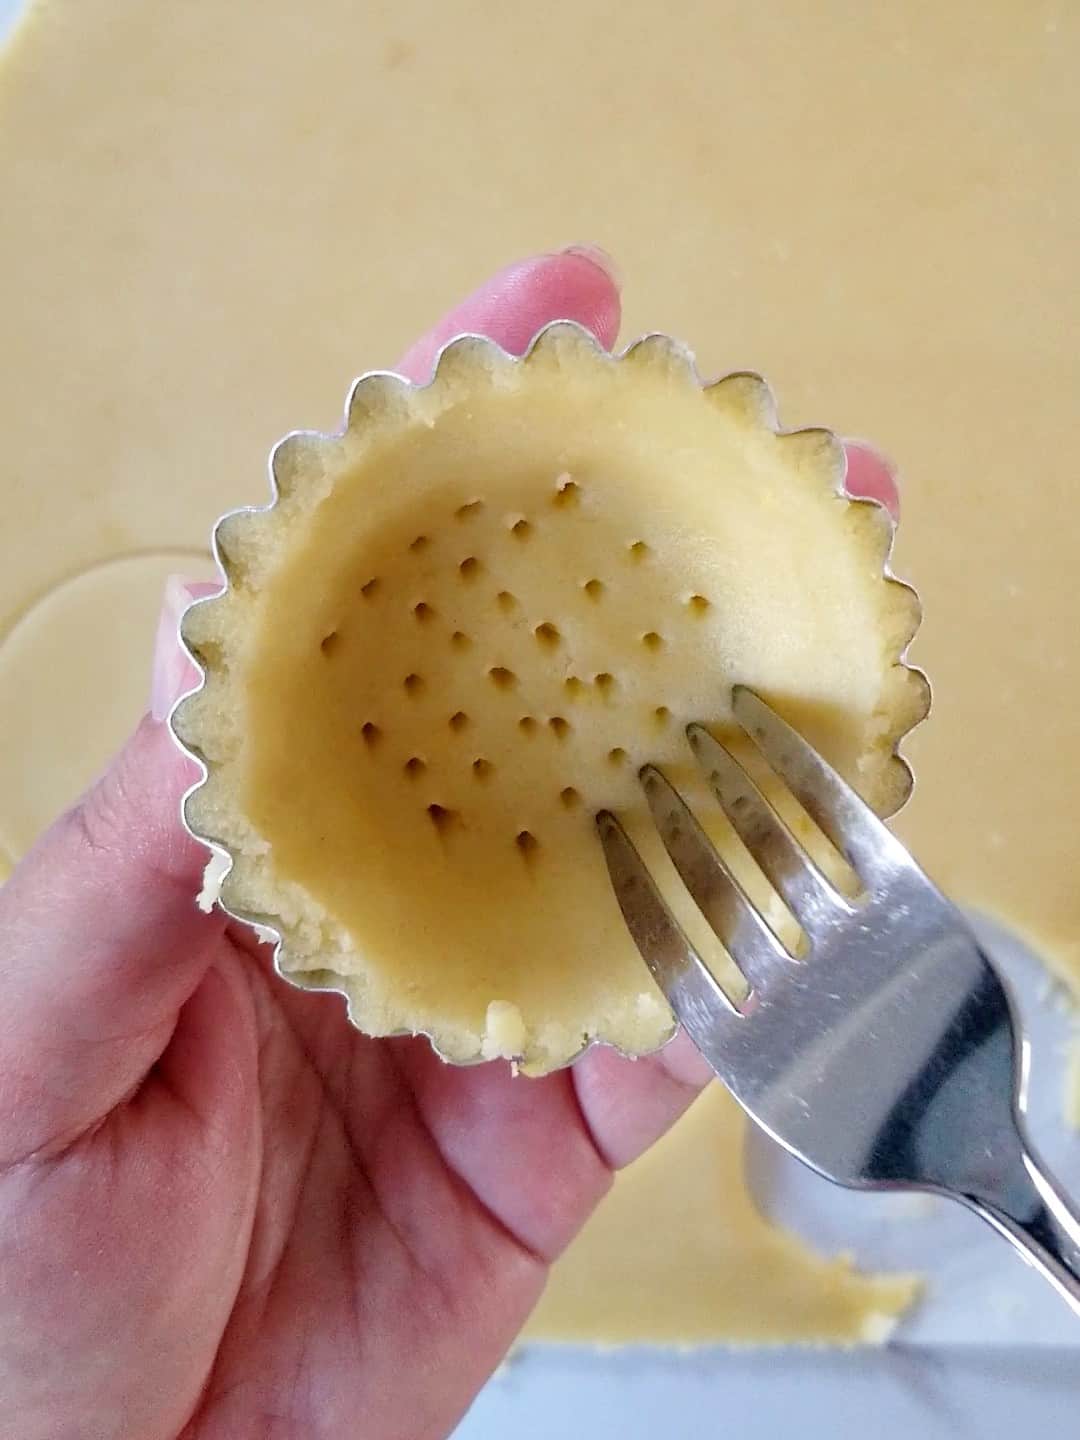 dough in mini tart mould being pricked by the fork